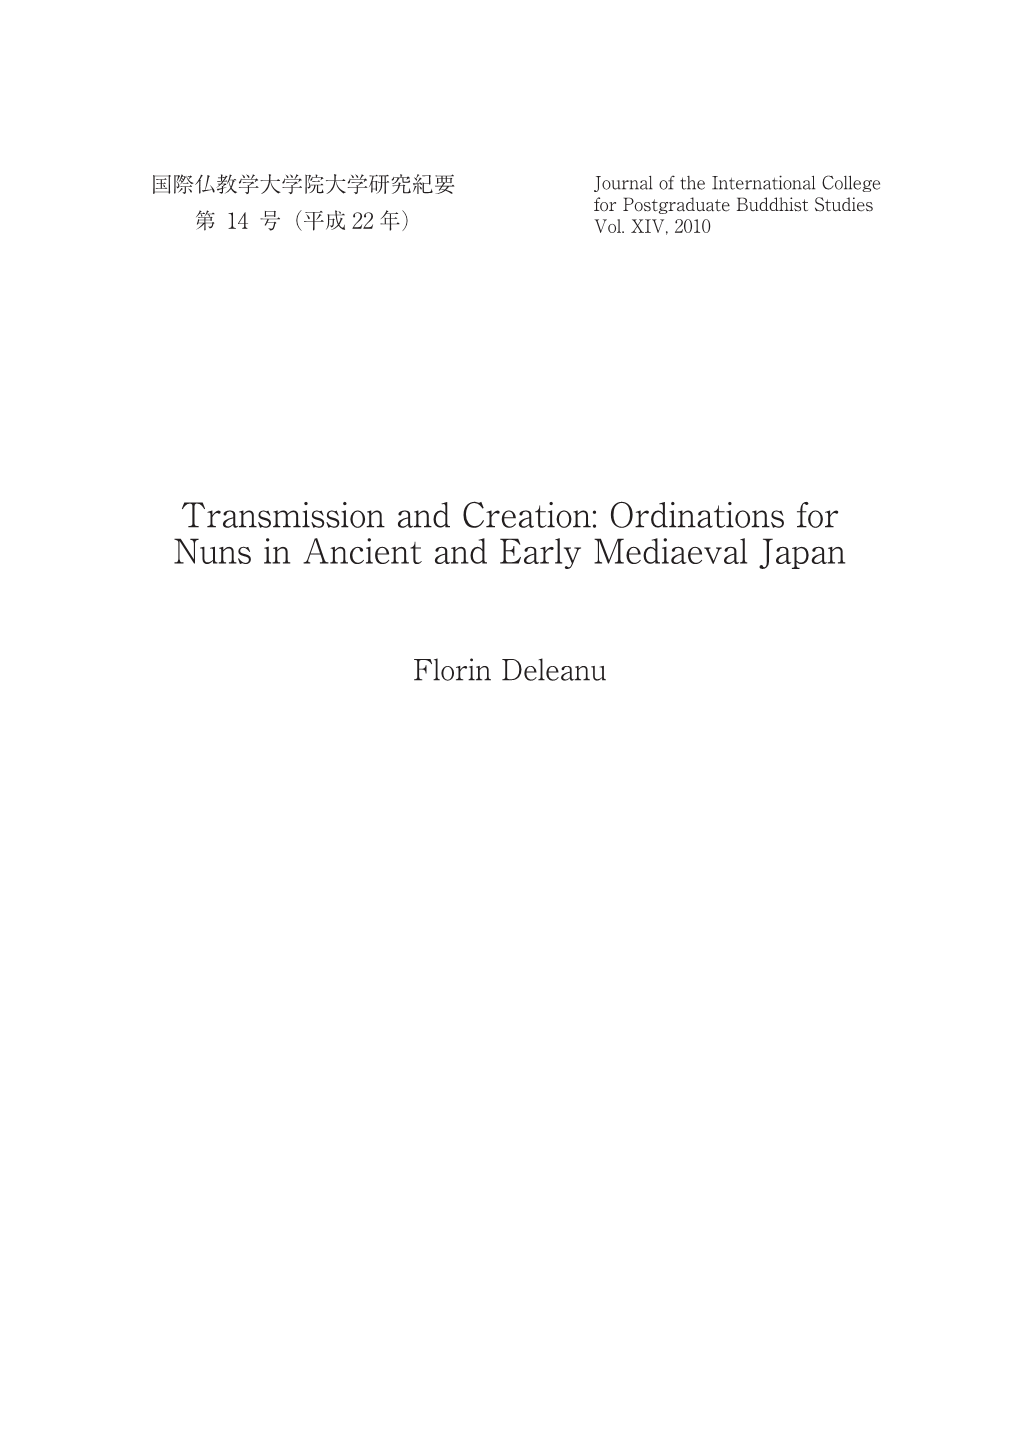 Ordinations for Nuns in Ancient and Early Mediaeval Japan (PDF)